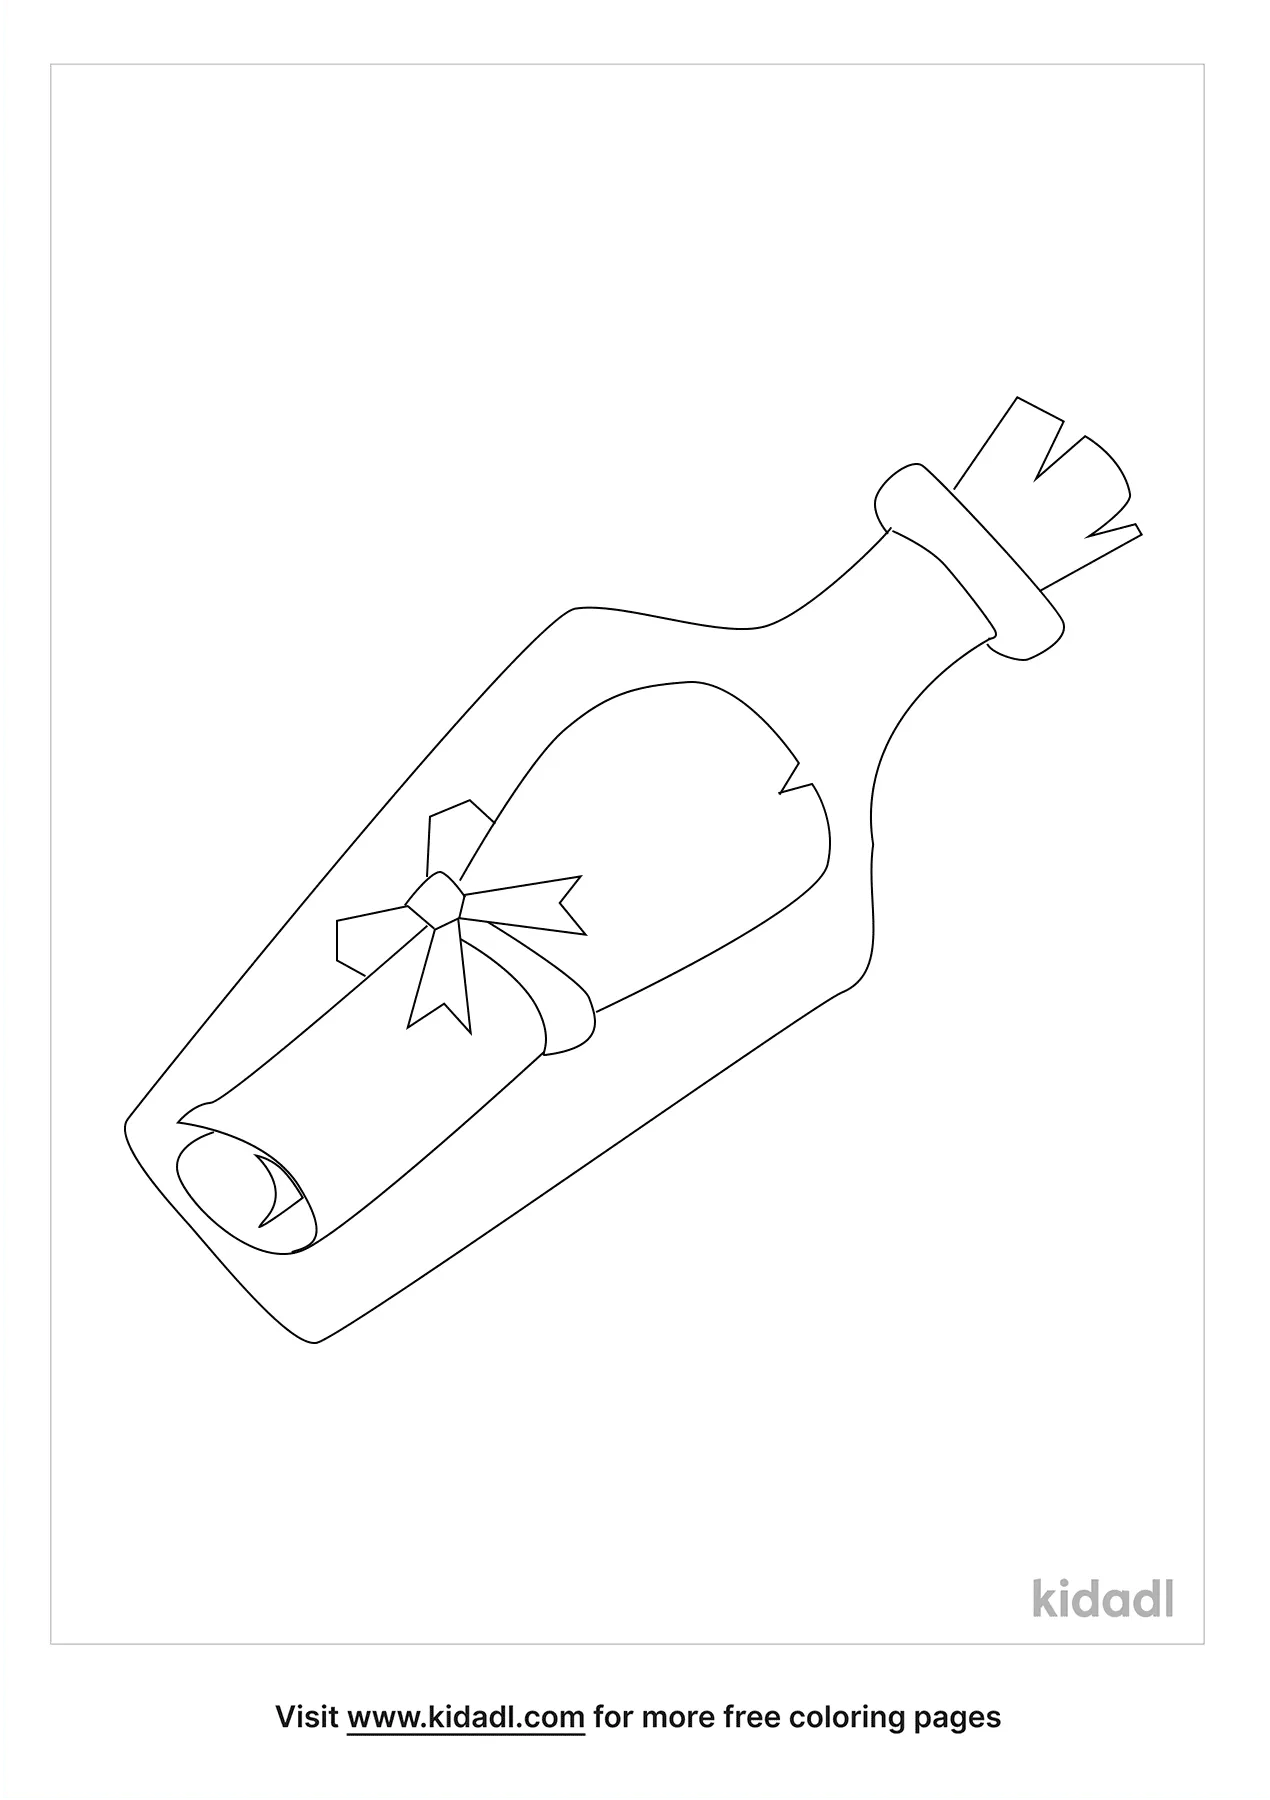 Message In A Bottle Coloring Page